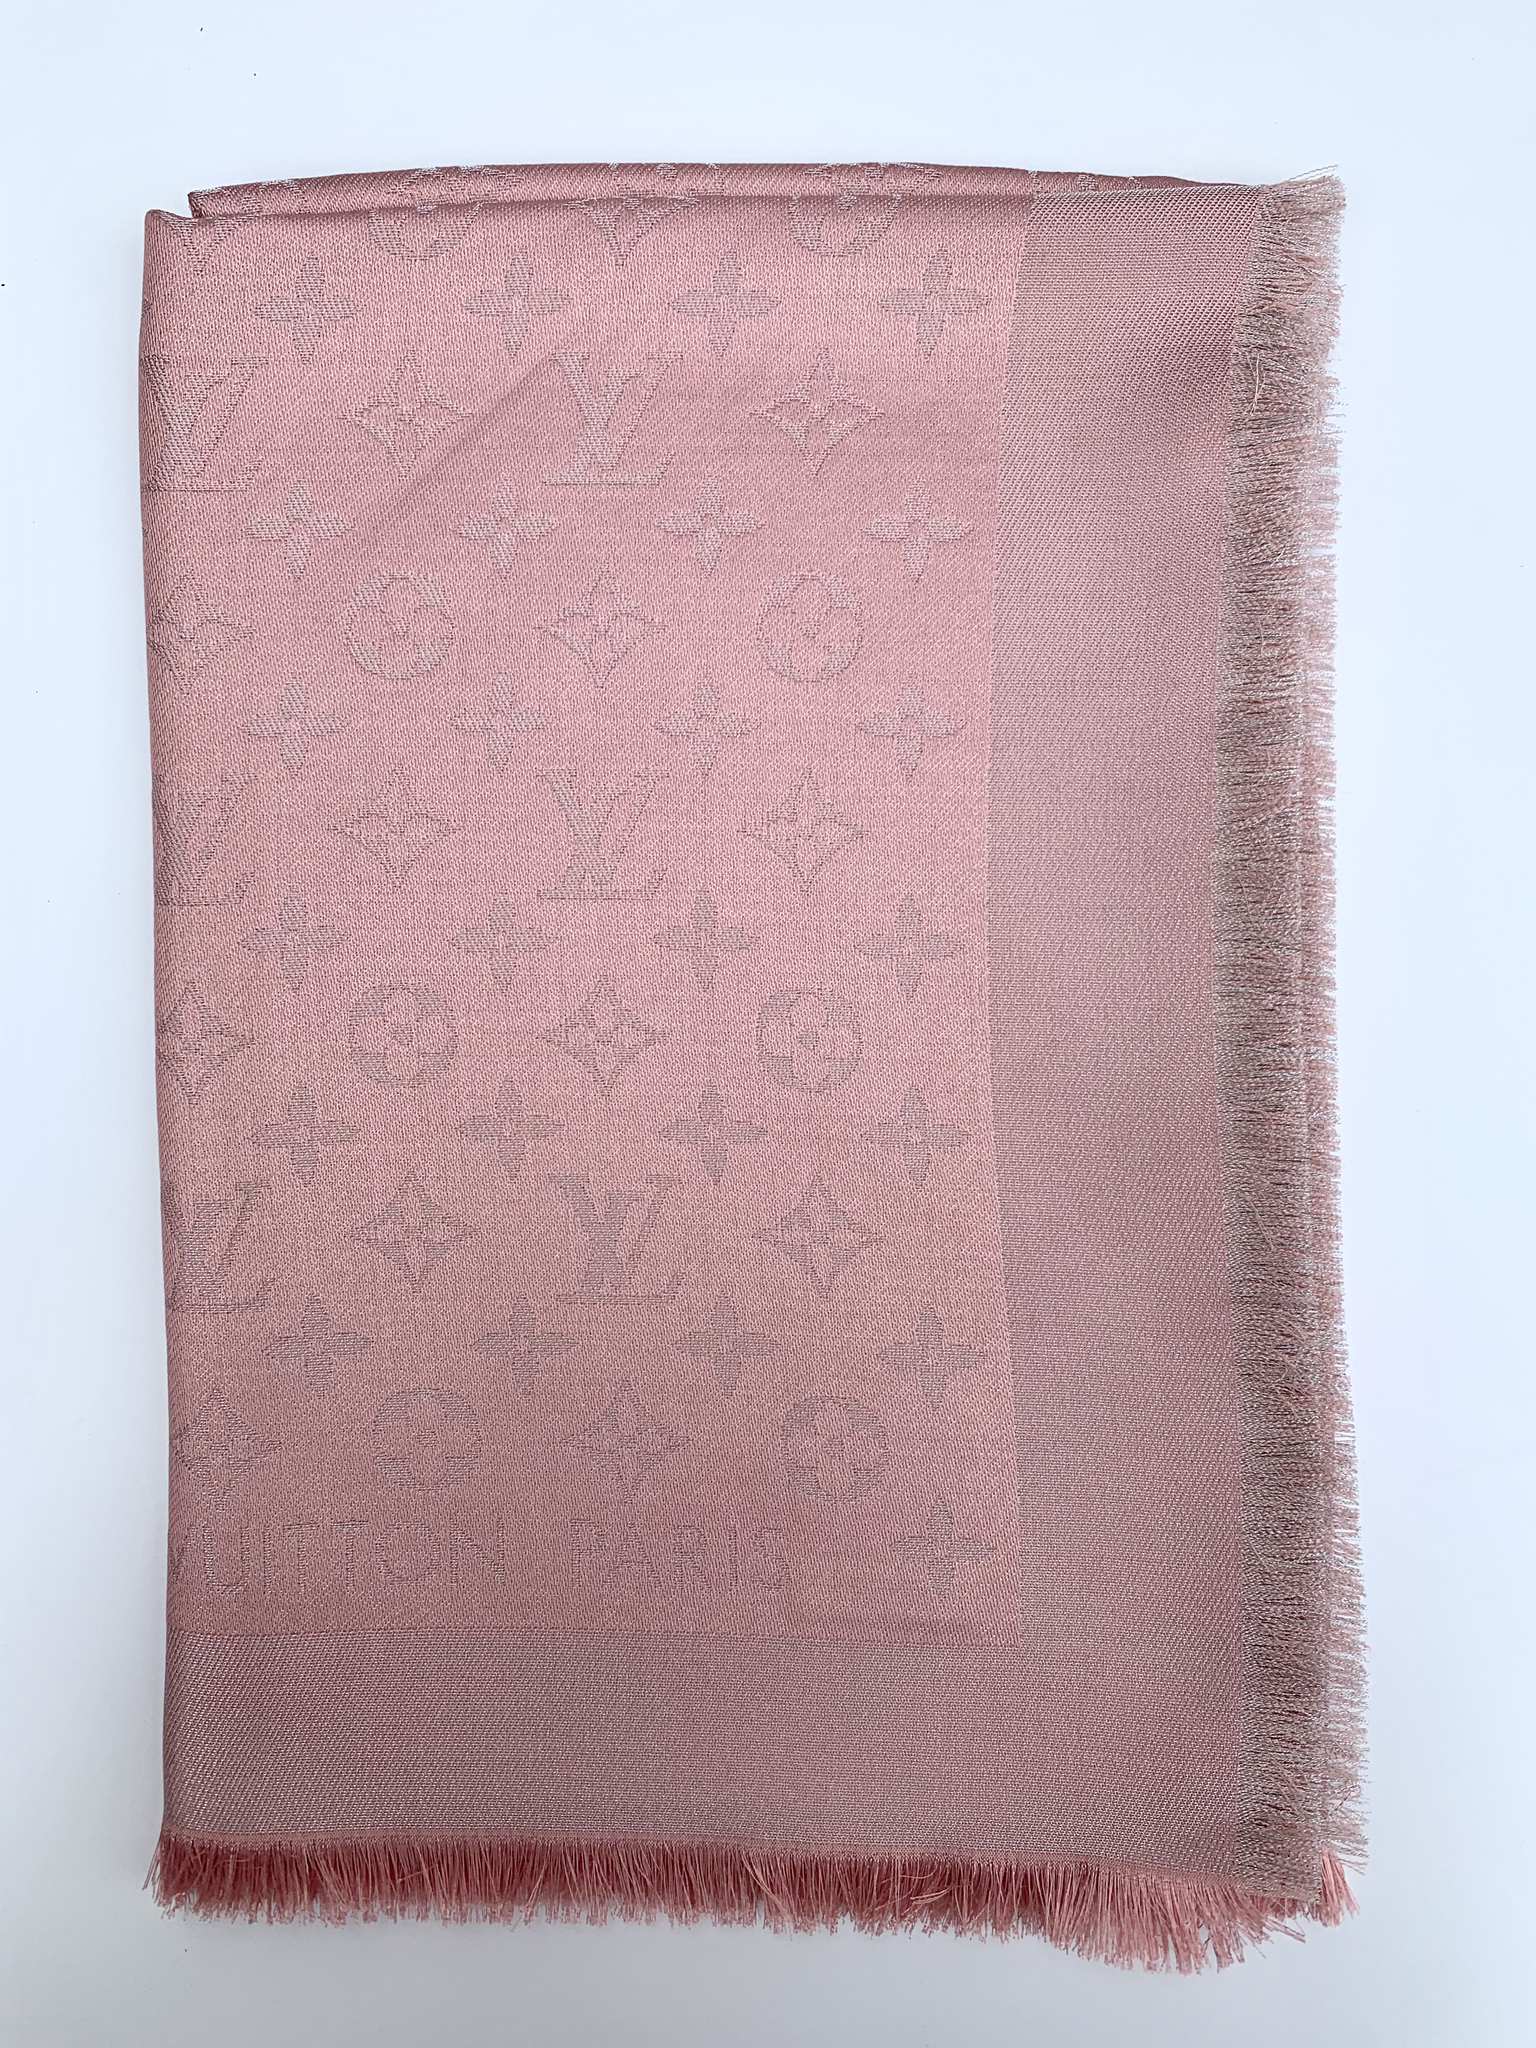 Louis Vuitton Twilly Scarf, Red and Beige, New in Box GA001 - Julia Rose  Boston